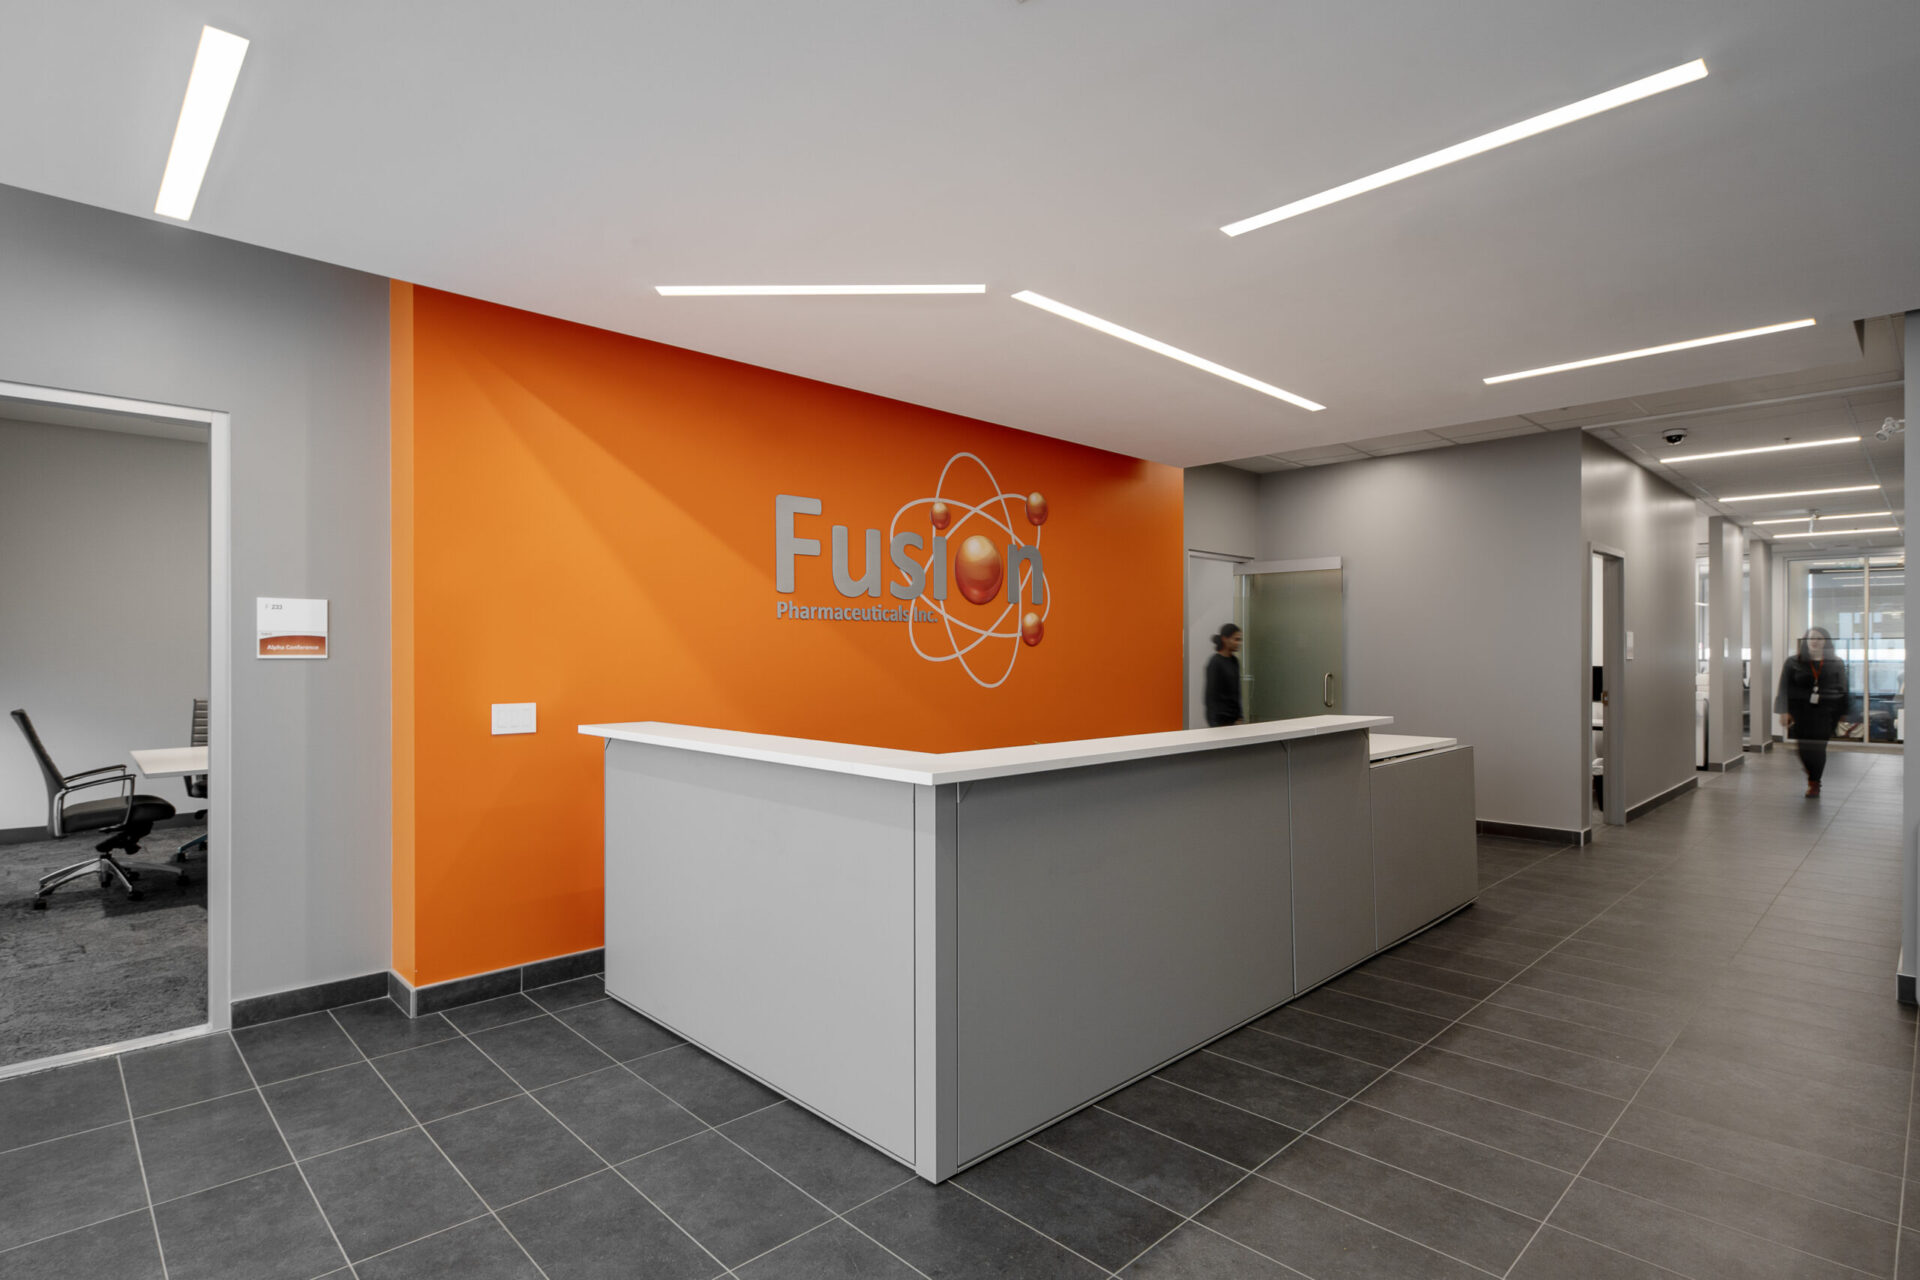 A reception area in an office with engineering-inspired design featuring orange and white walls.